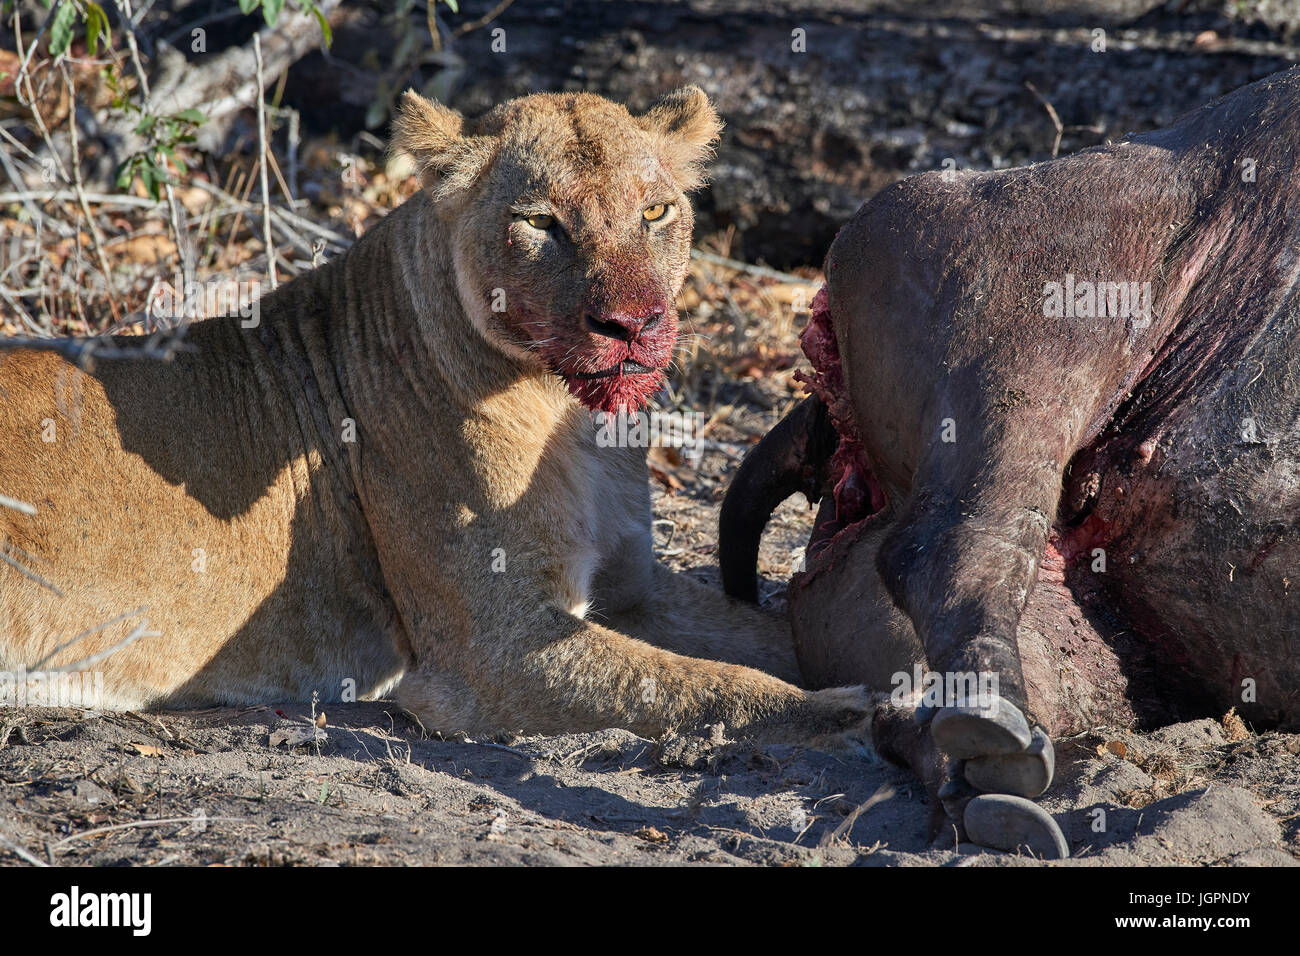 Lioness, Panthera leo, feeding on buffalo, bloodied face, Sabie Sands game reserve, South Africa Stock Photo